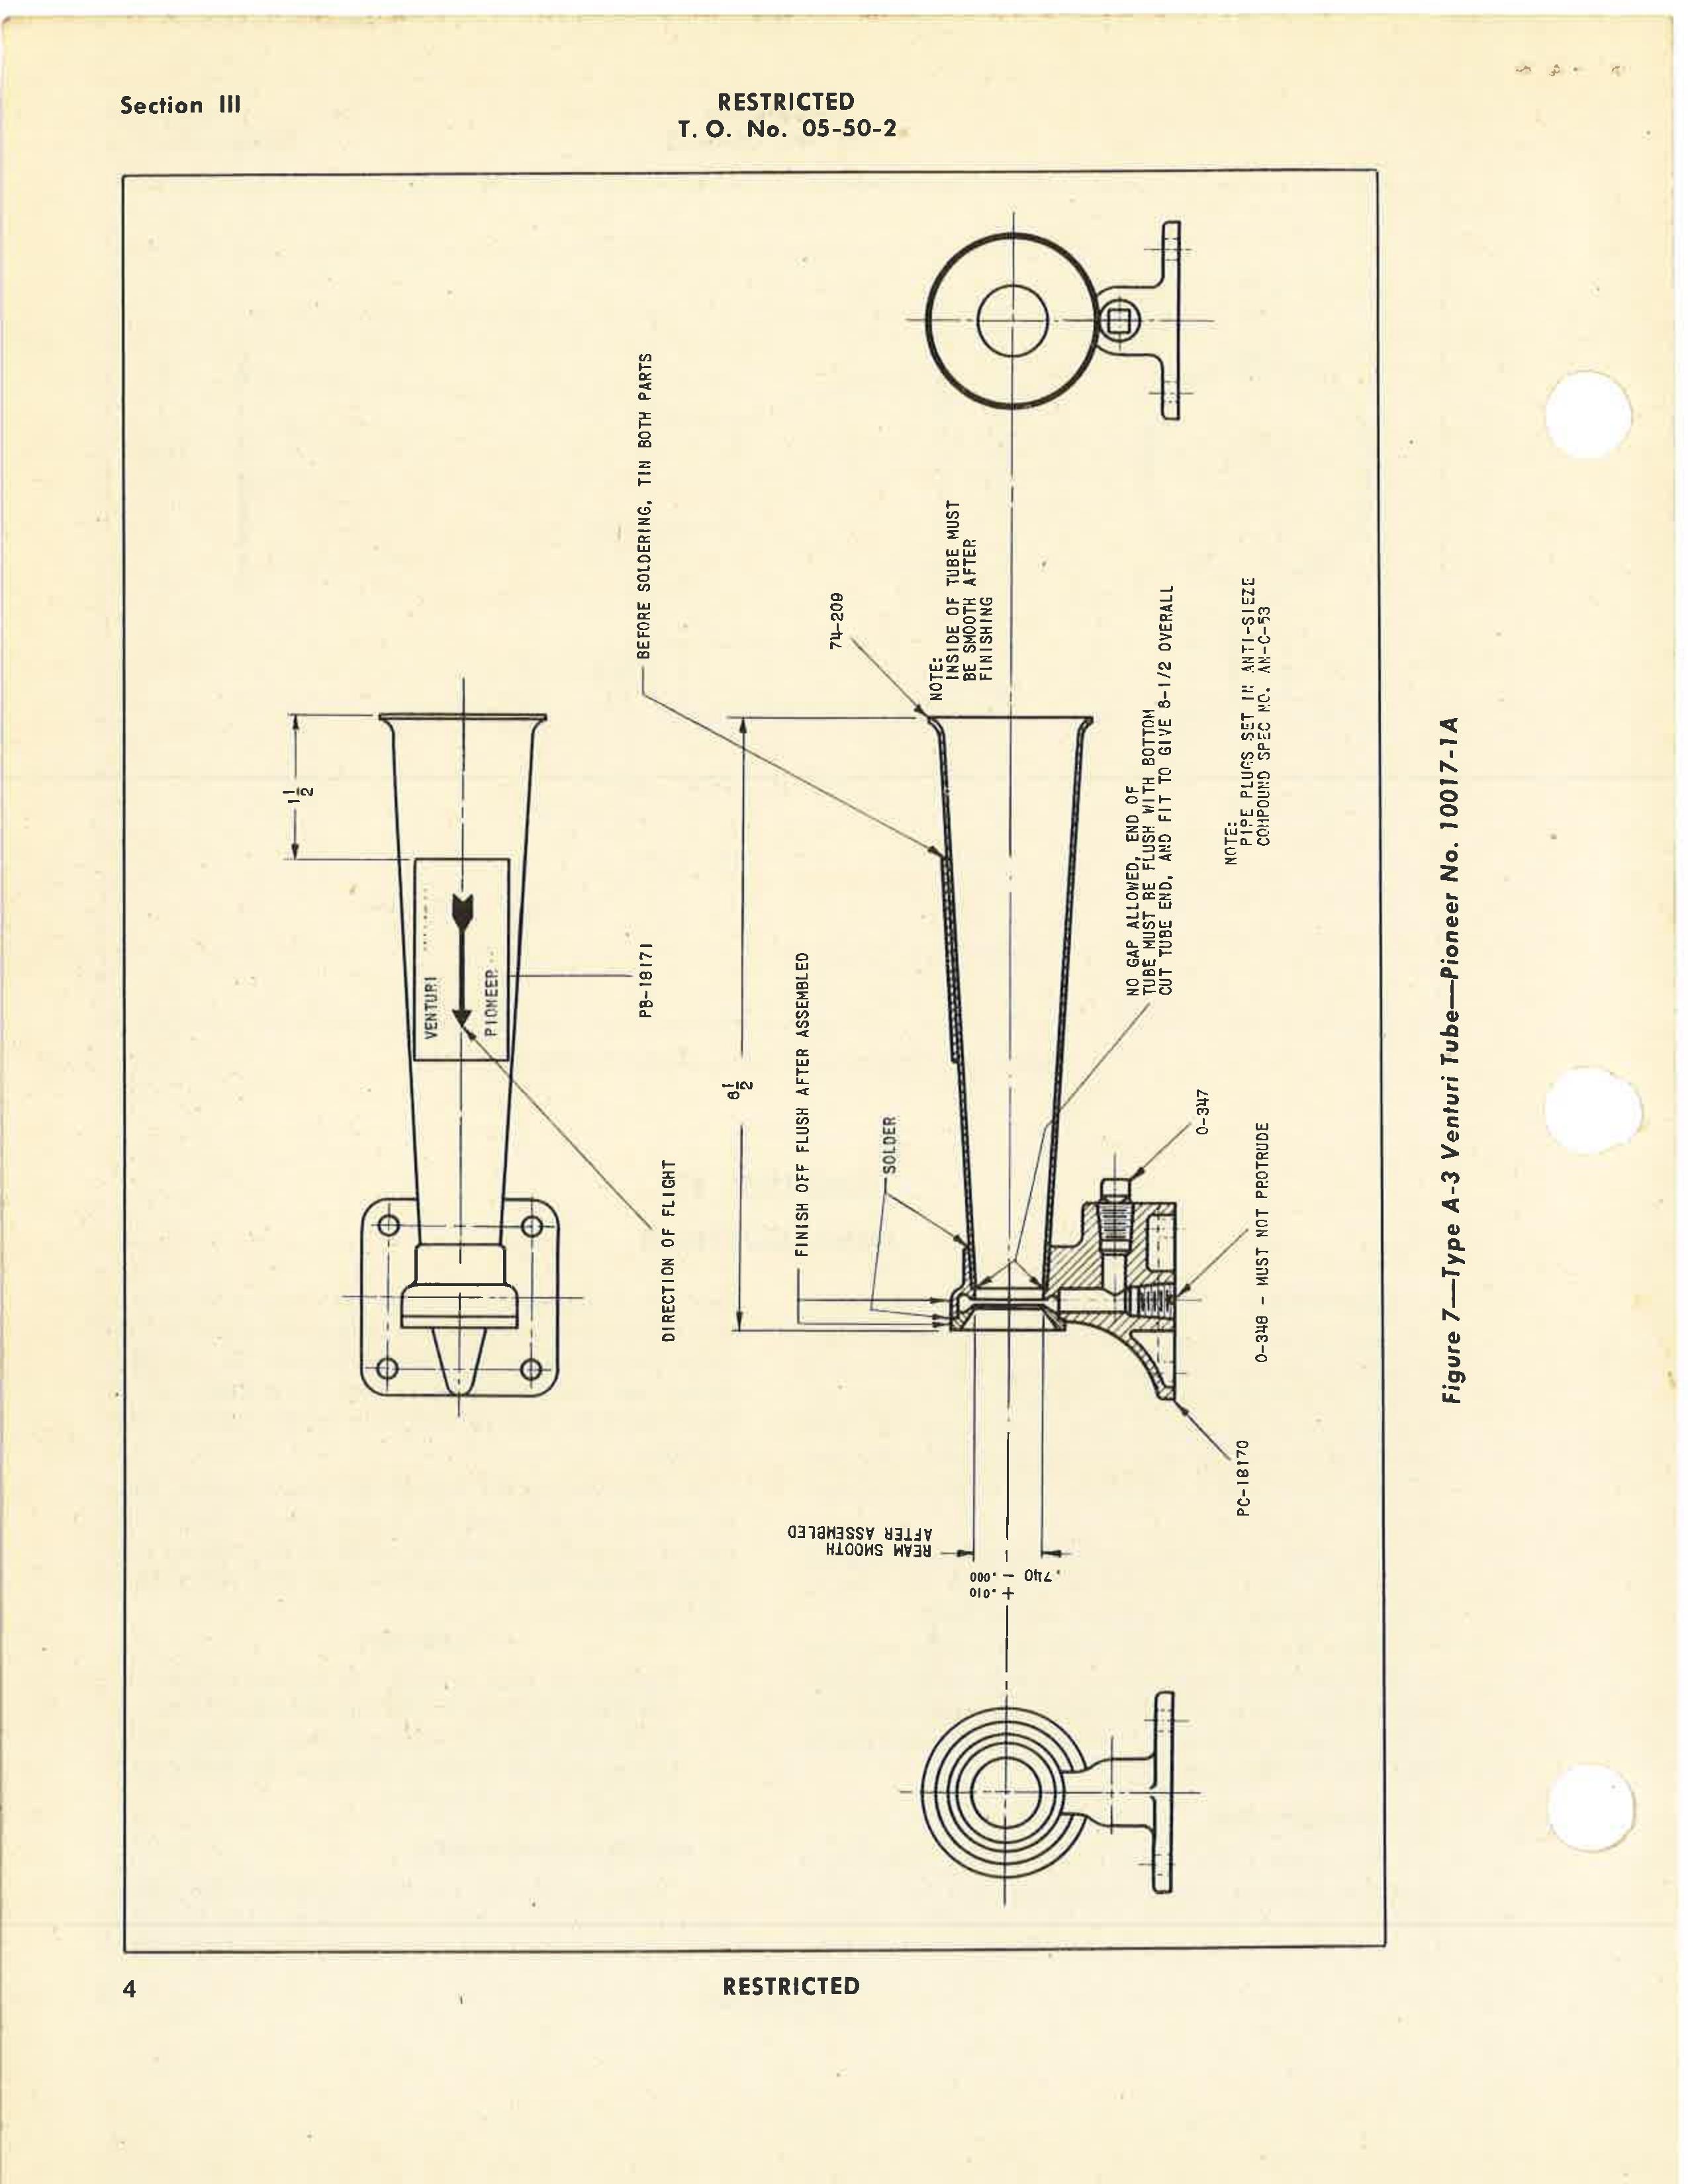 Sample page 10 from AirCorps Library document: Handbook of Instructions with Parts Catalog for Types A-3, A-3A and B-4, Power Veturi Tubes